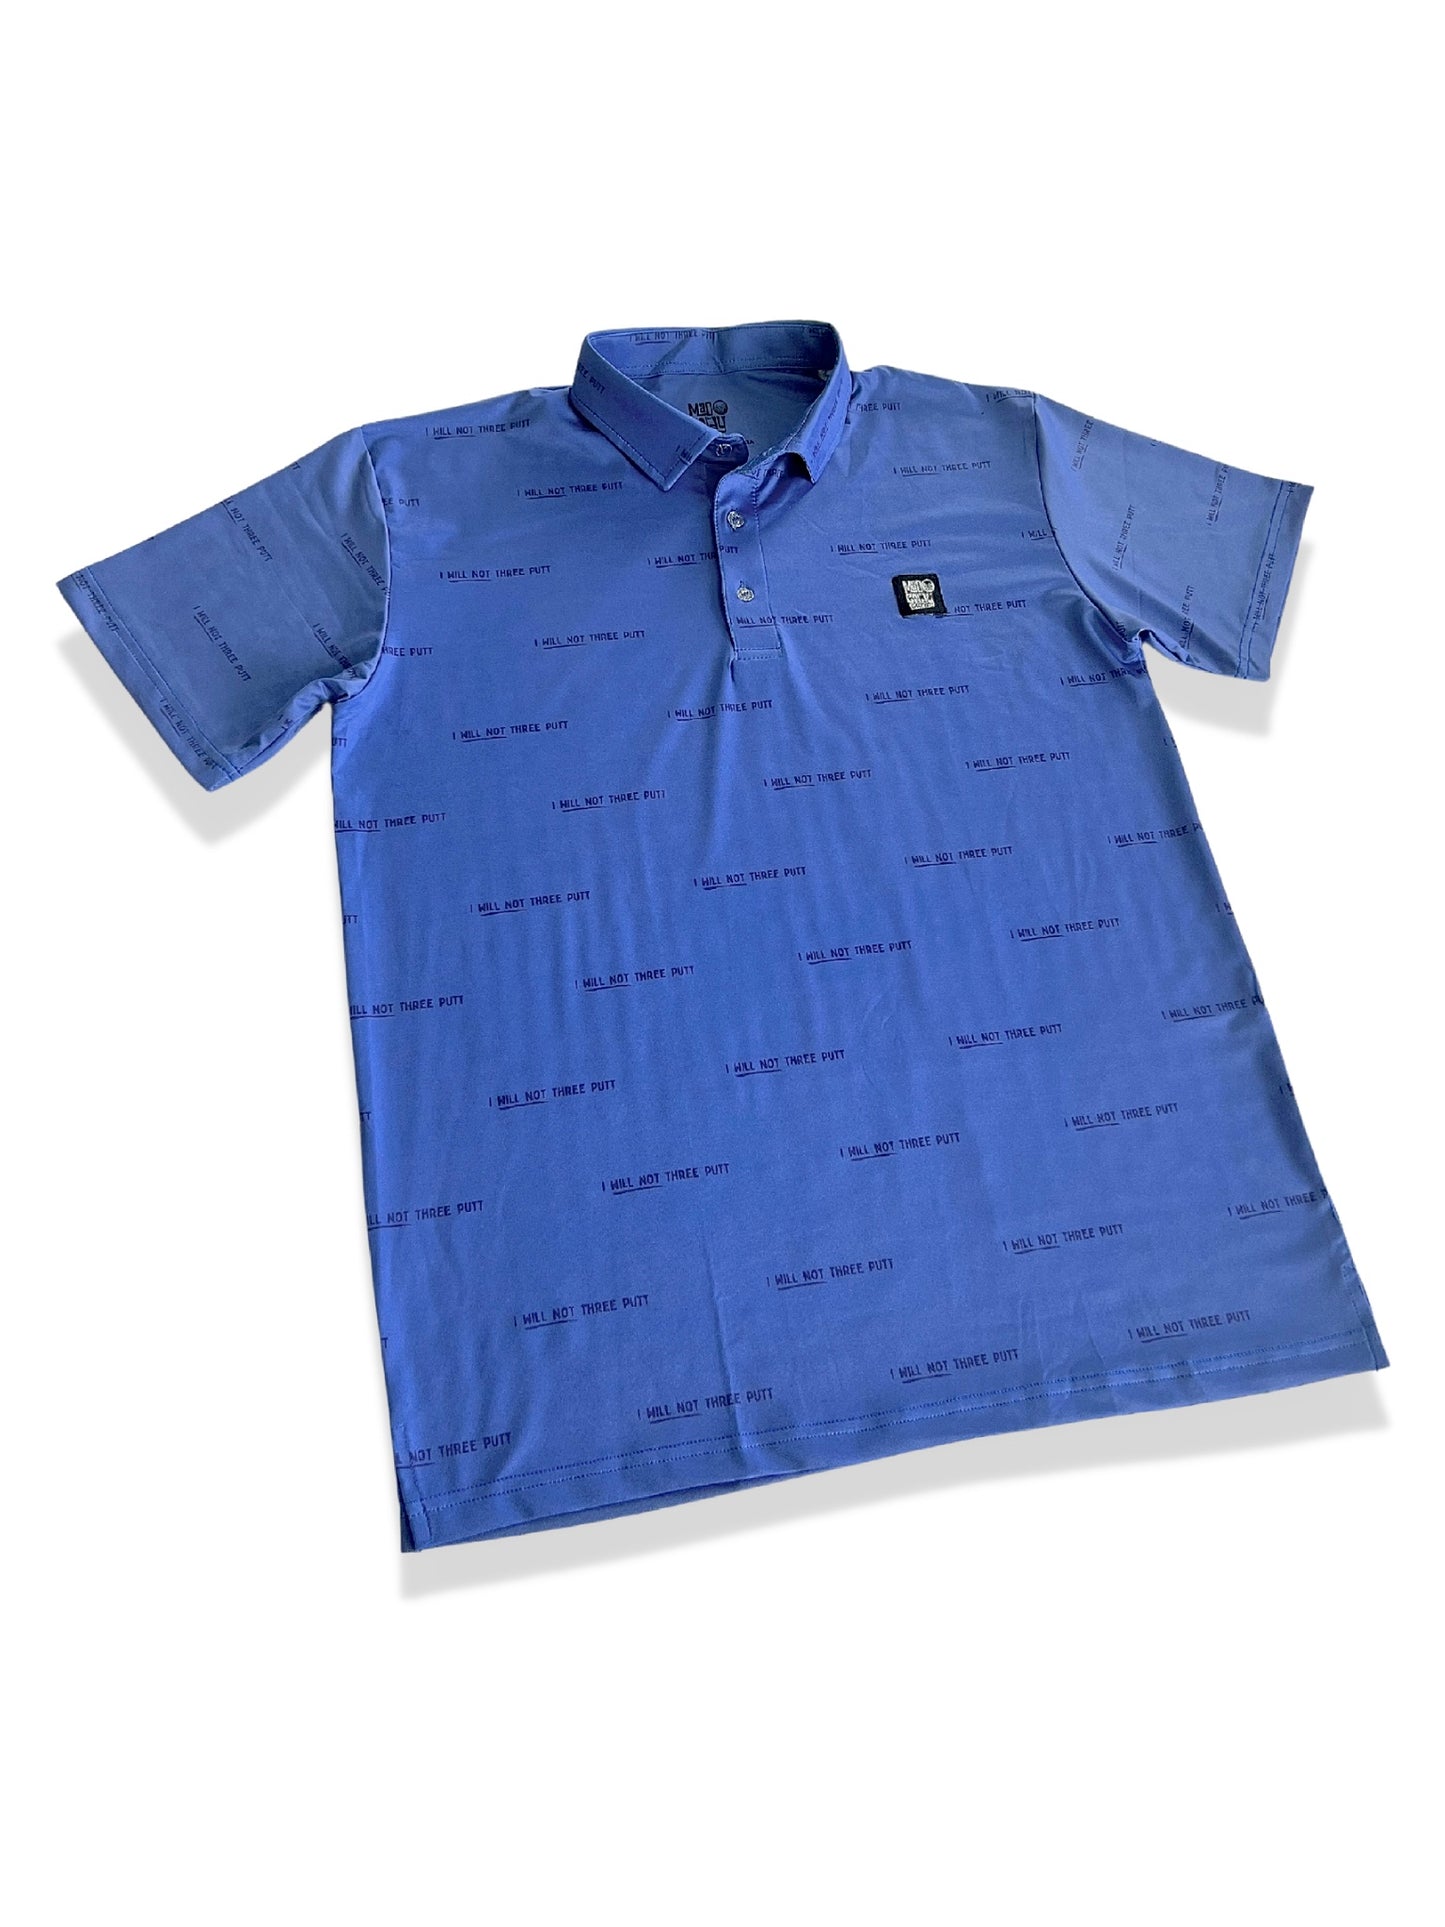 I Will Not Three Putt - Polo Shirt - Mad Caddy Golf Co.